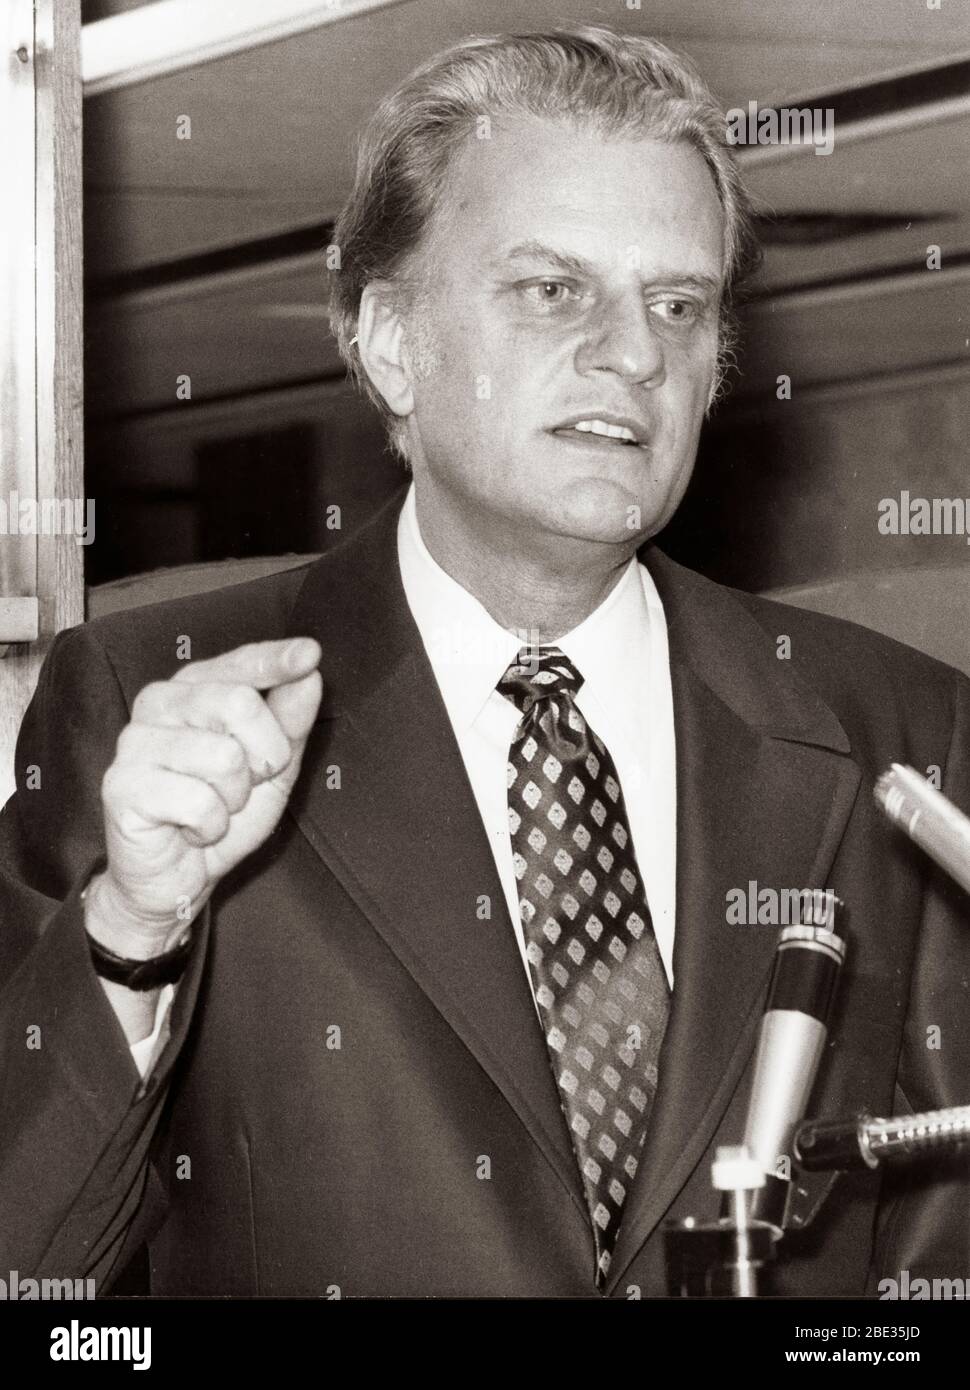 Oct. 2, 1960 - London, England, U.K. - BILLY GRAHAM, born William Franklin Graham, Jr. on November 7, 1918, is an evangelical Christian reverend.  He gained celebrity status by broadcasting his sermons on radio and television. PICTURED: Reverend Billy Graham speaking during on of his sermons. Stock Photo